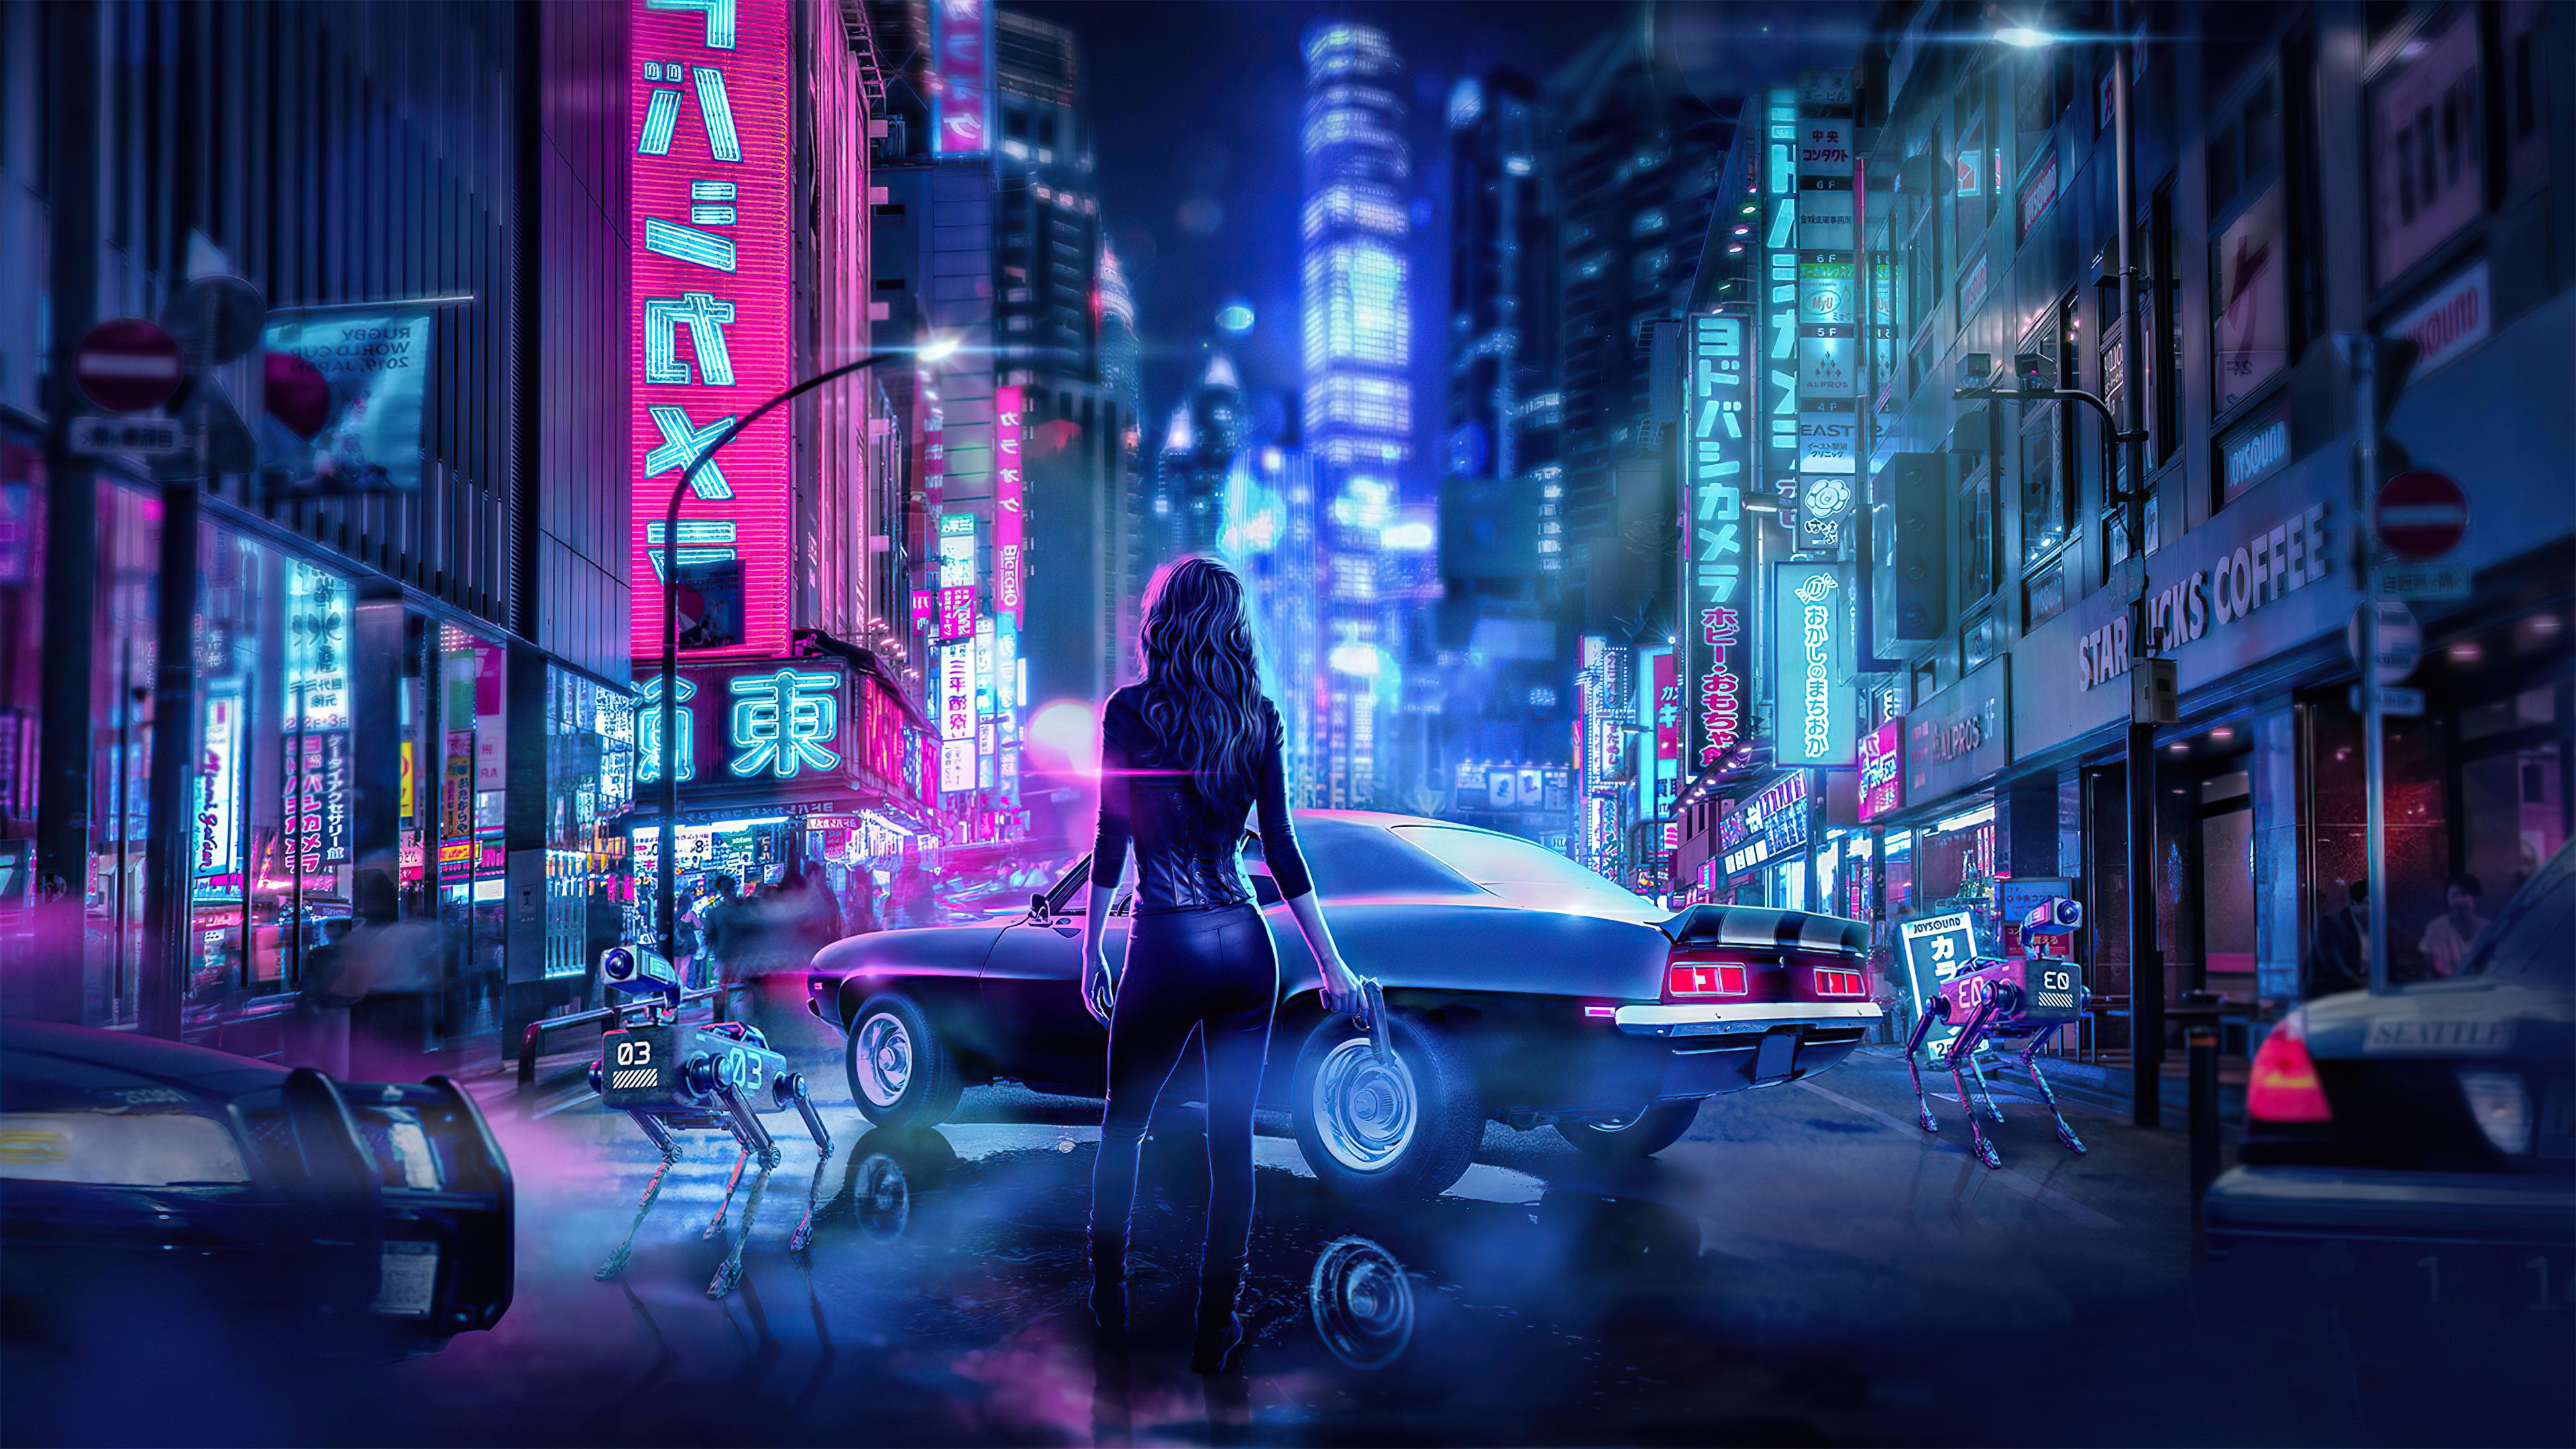 Cyber Japan Neon Lights Girl With Gun 4k, HD Artist, 4k Wallpaper, Image, Background, Photo and Picture